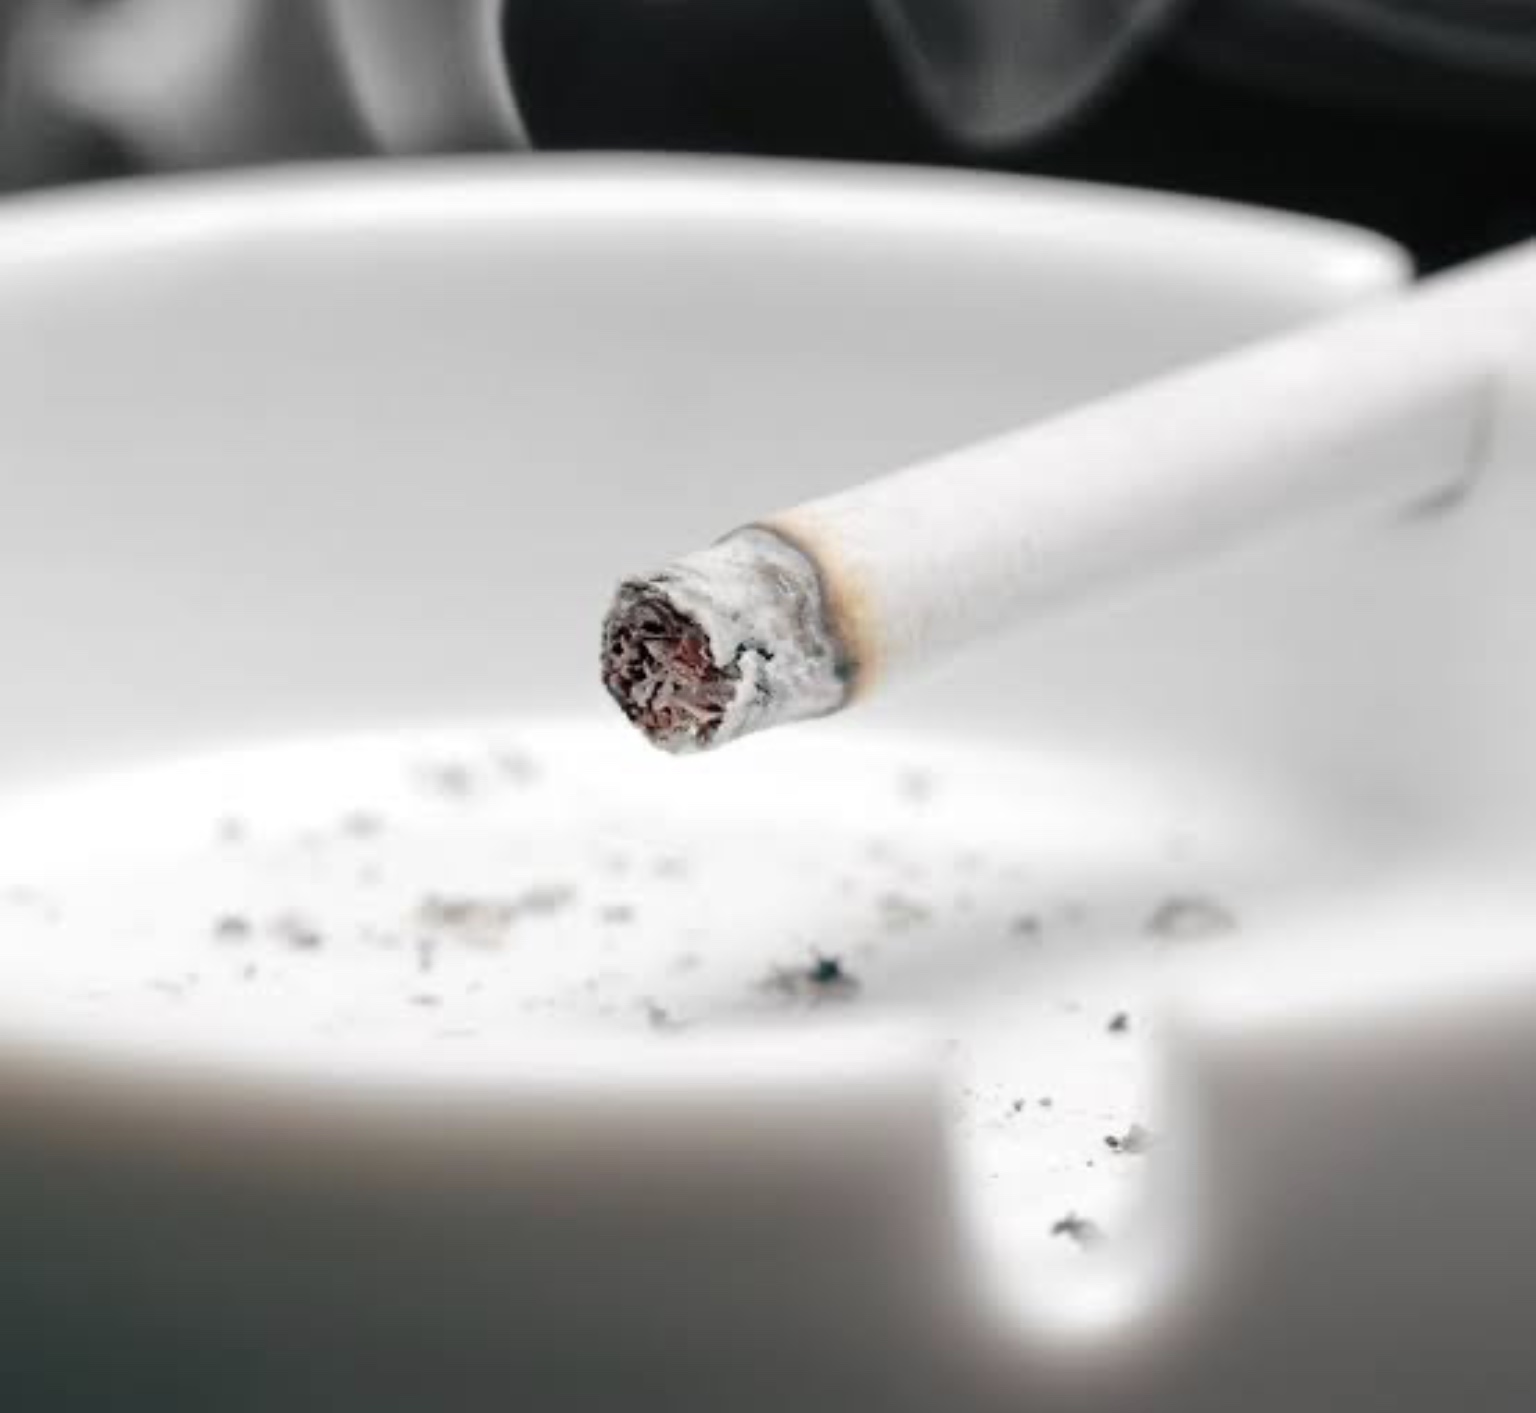 Tobacco Control: Commission To Confiscate Cigarettes Sold In Sticks